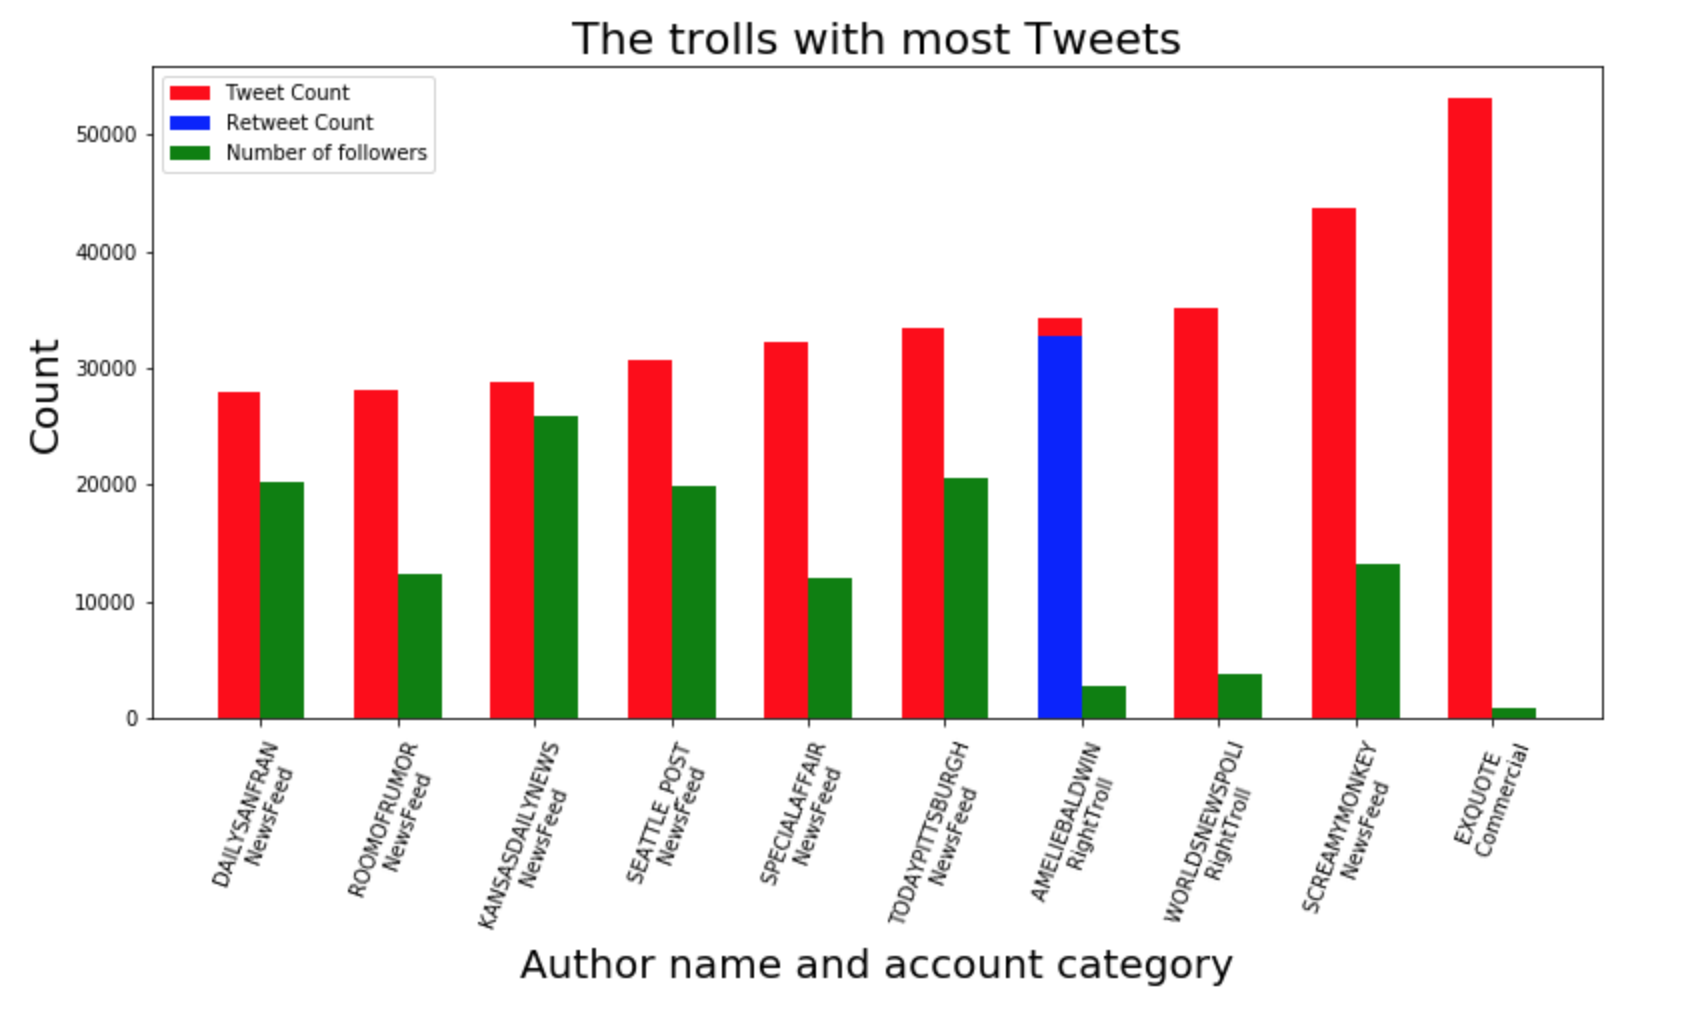 Users with most tweets first dataset